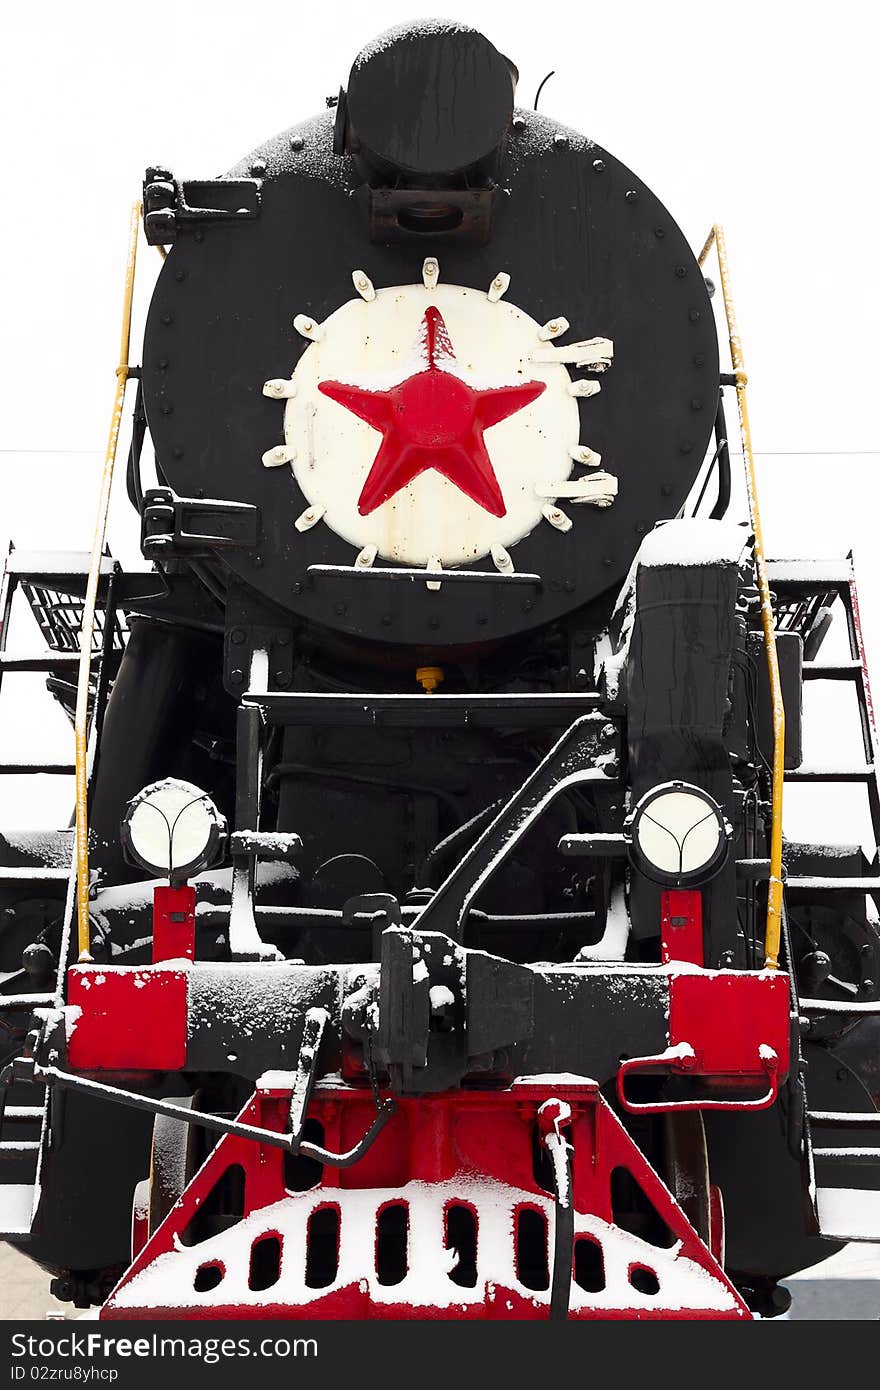 Front of the locomotive with a red star. Front of the locomotive with a red star